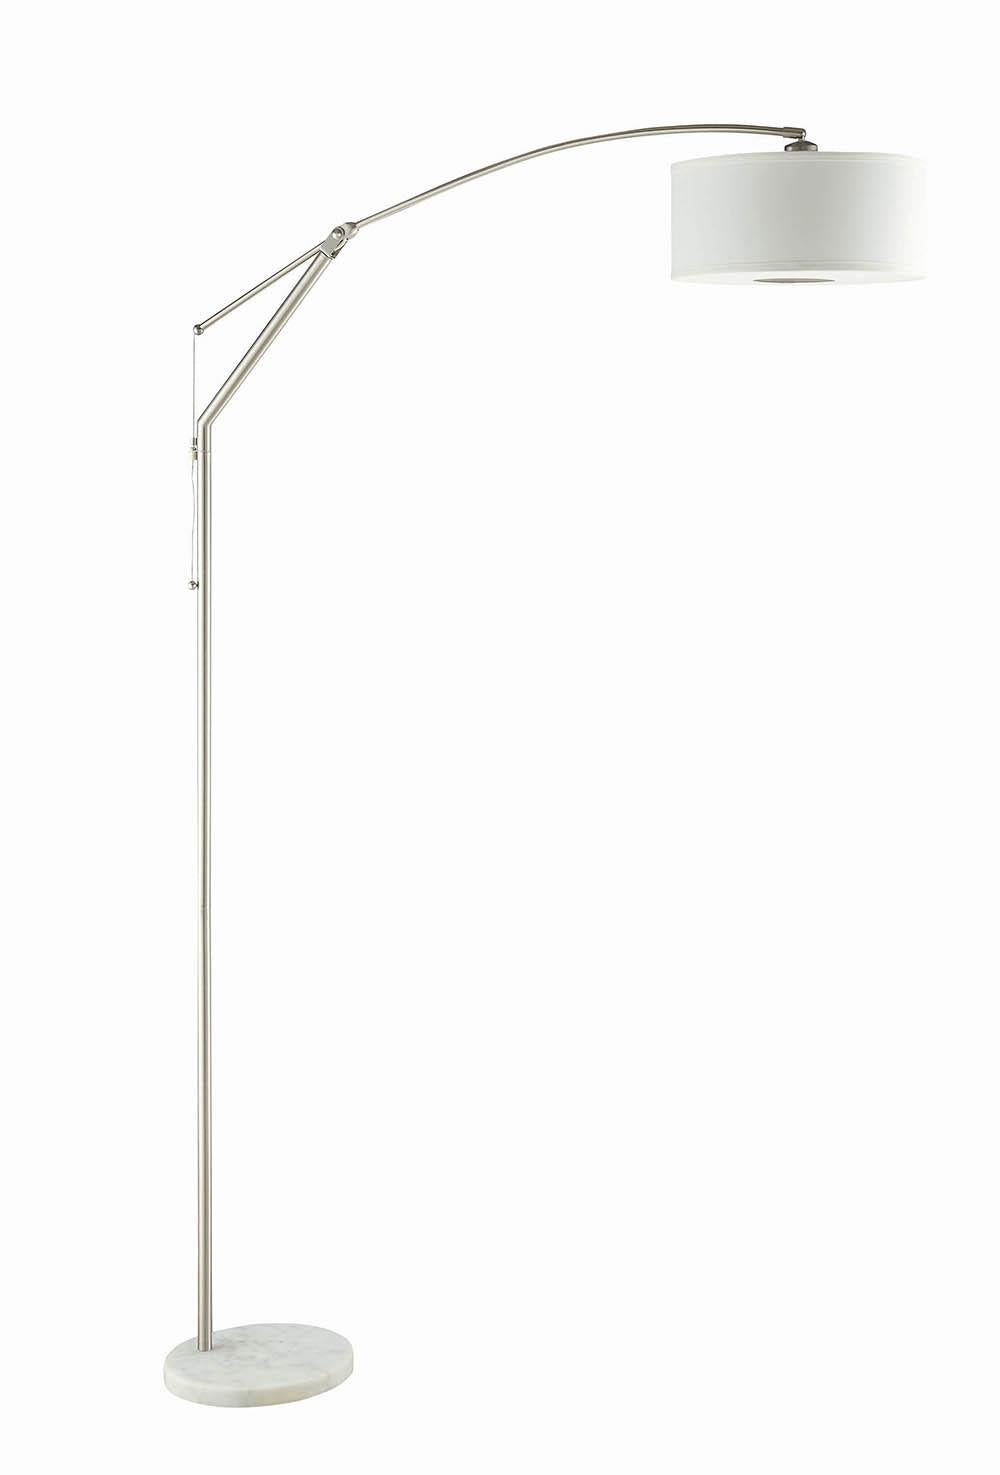 G901490 - Adjustable Arched Arm Floor Lamp Chrome And White - ReeceFurniture.com